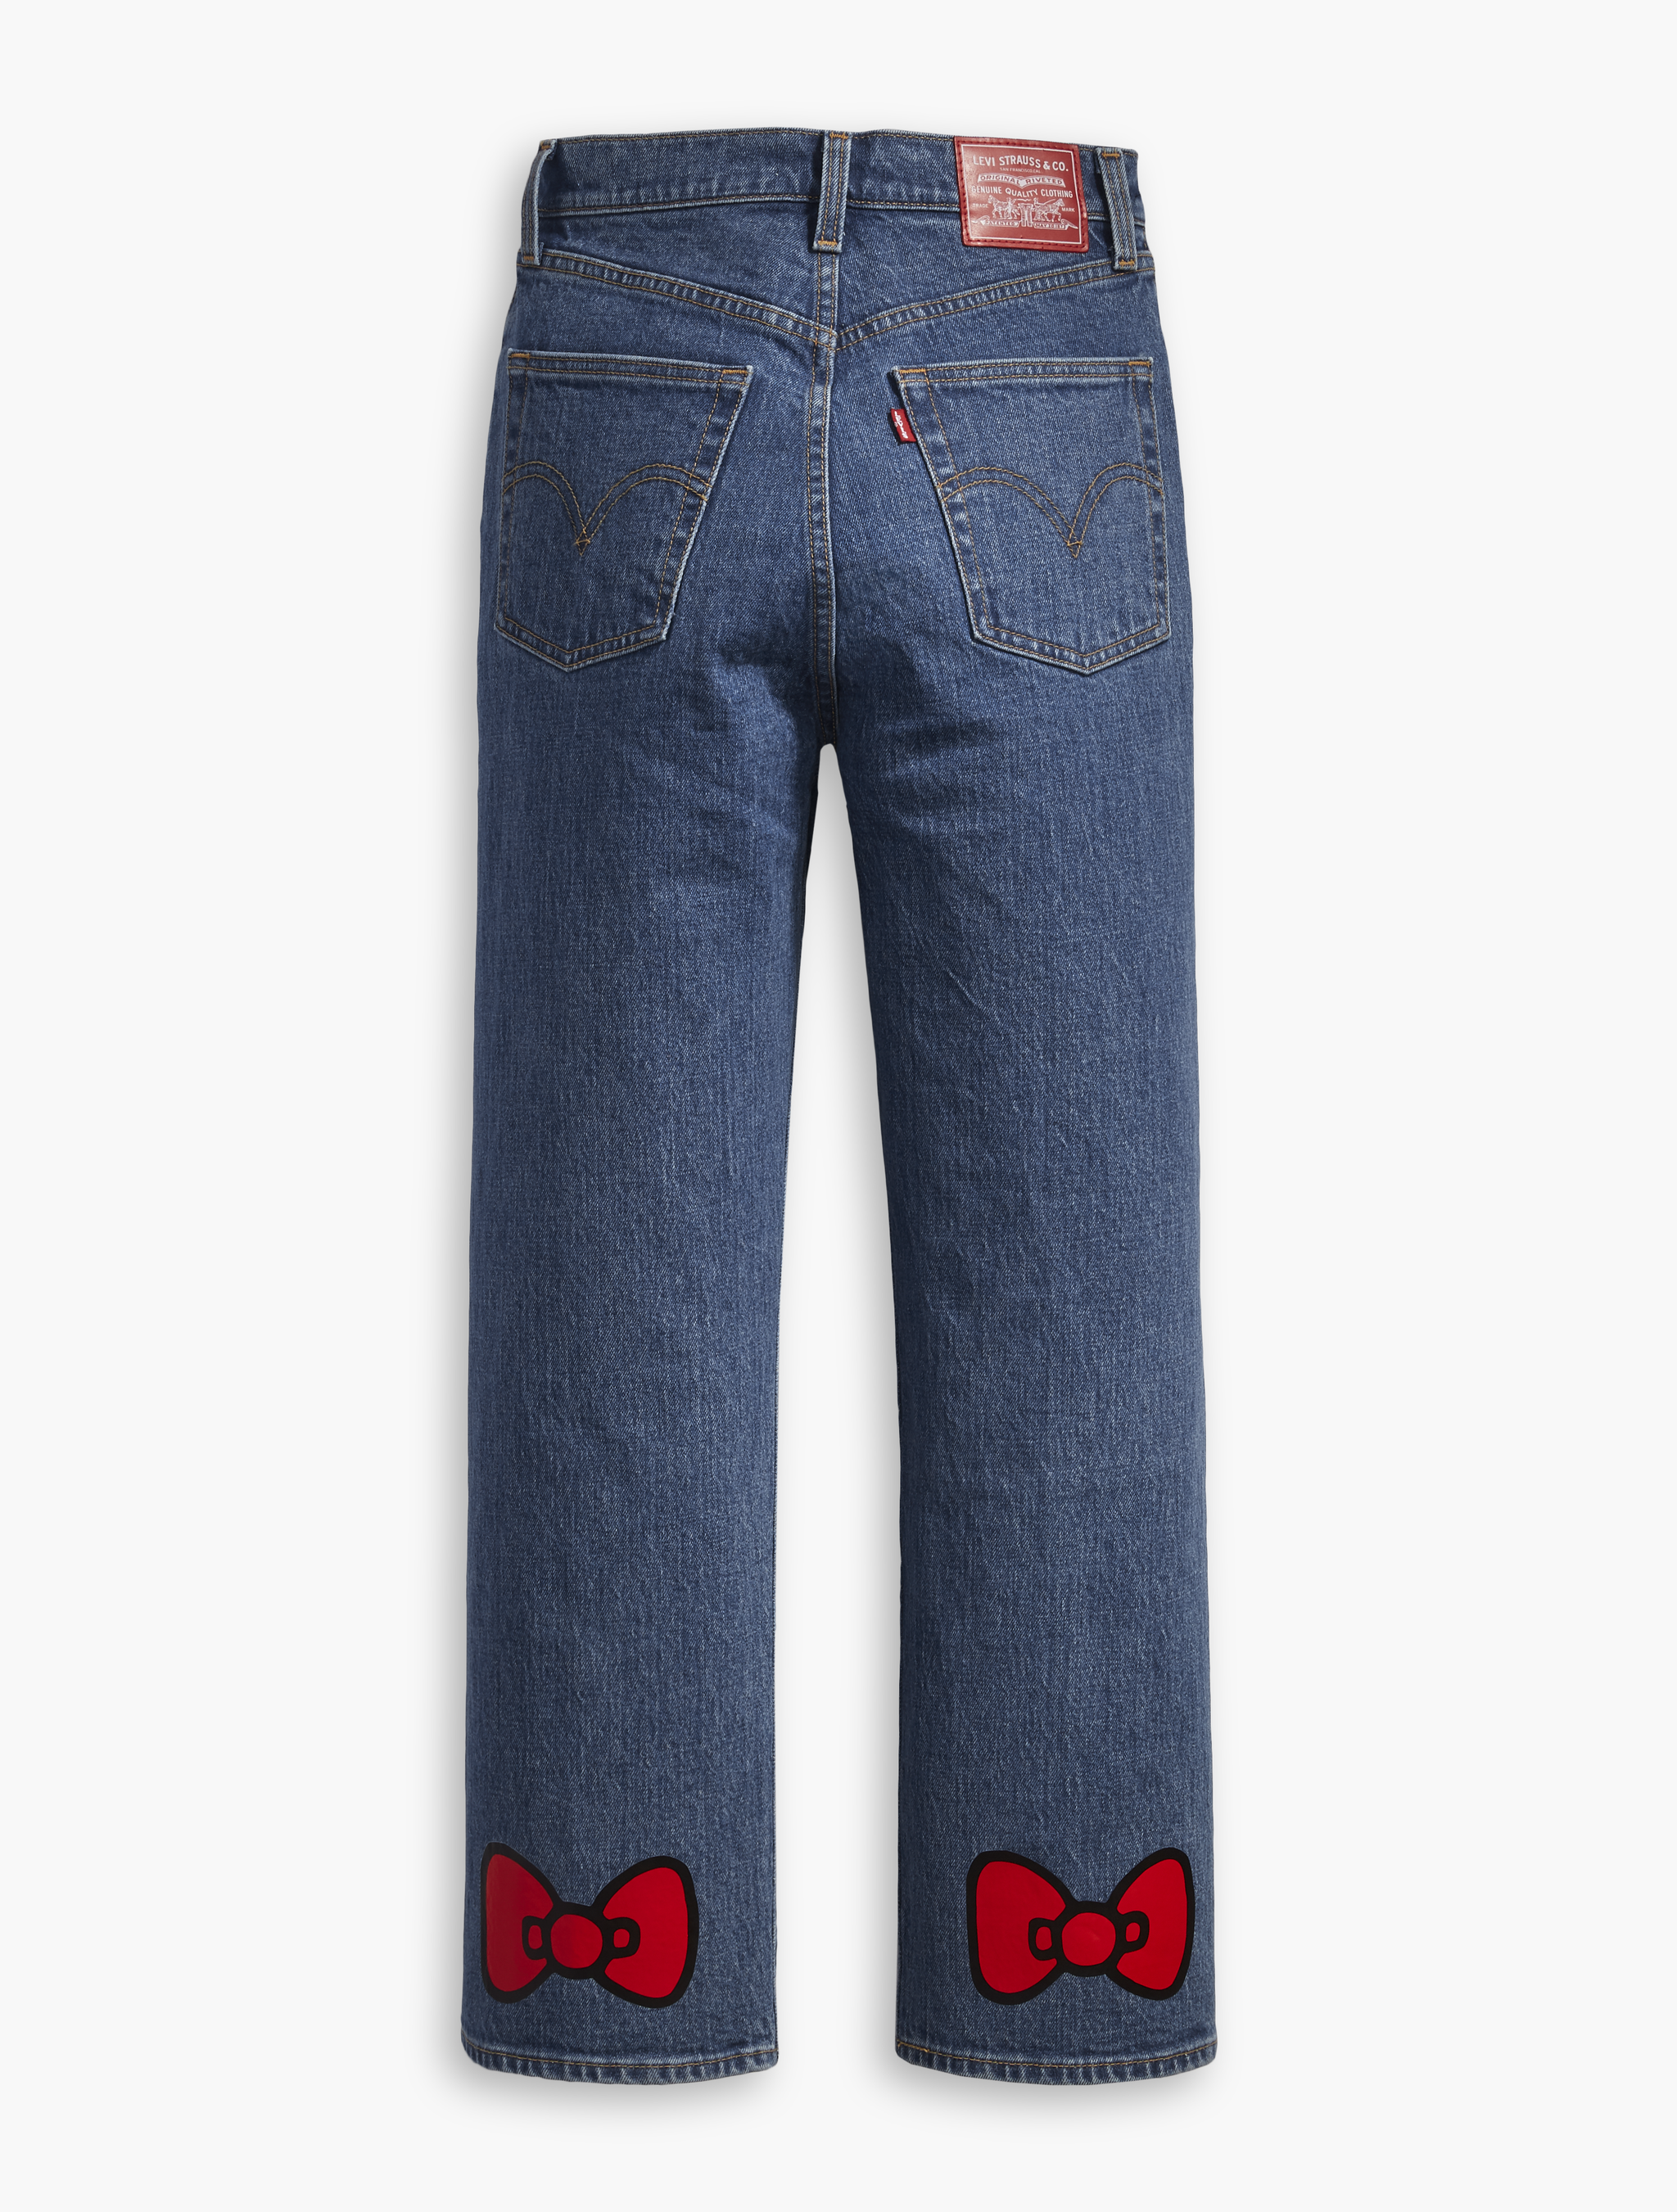 Levi's x Hello Kitty Ribcage Straight Ankle Jeans | You've Got to Be Kitten  Me — Levi's New Hello Kitty Collection Is Too Cute For Words | POPSUGAR  Fashion Photo 25